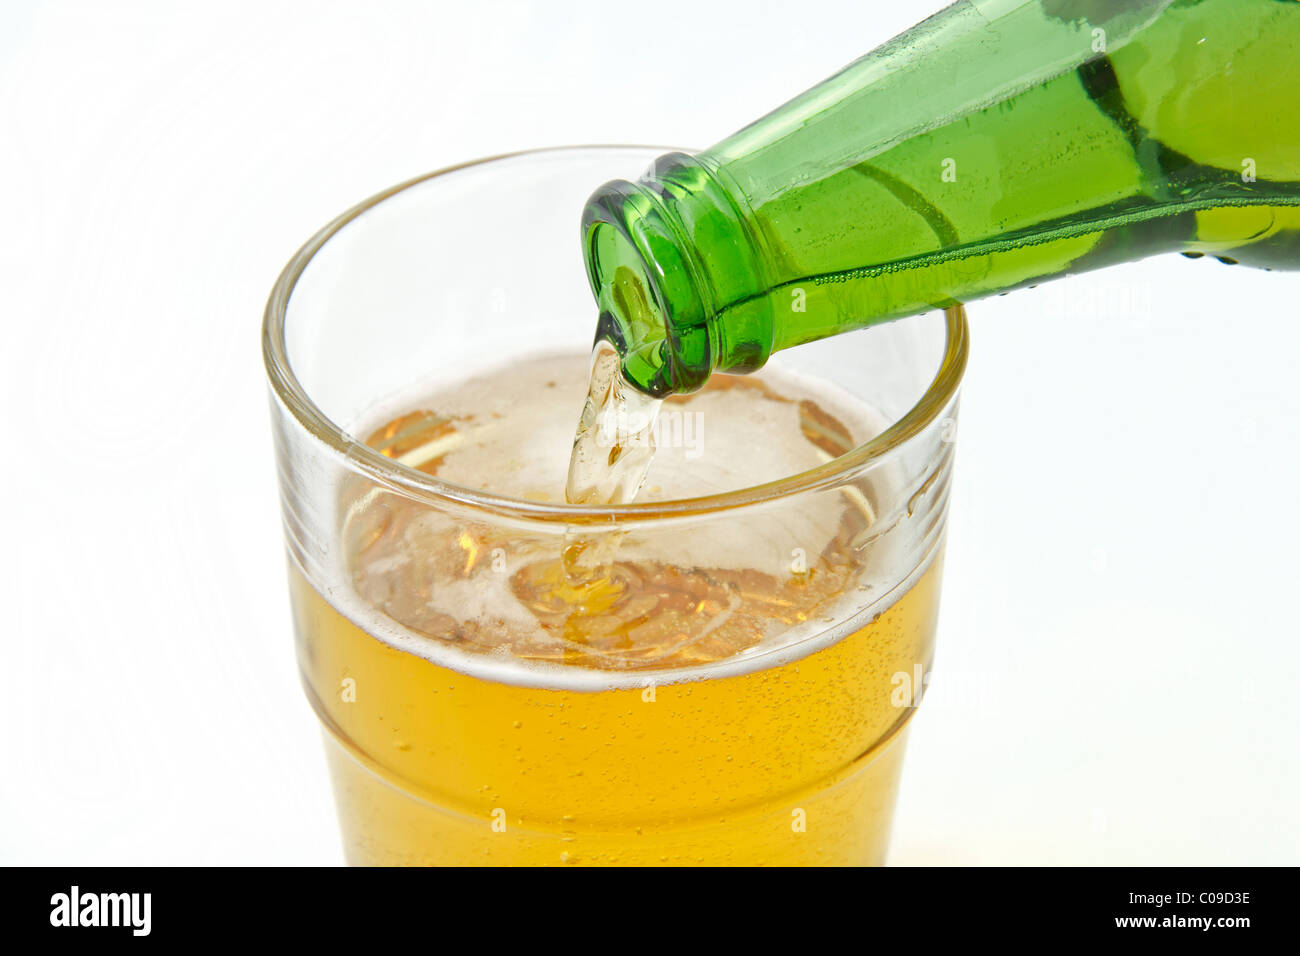 Pouring beer from a green beer bottle into a glass Stock Photo